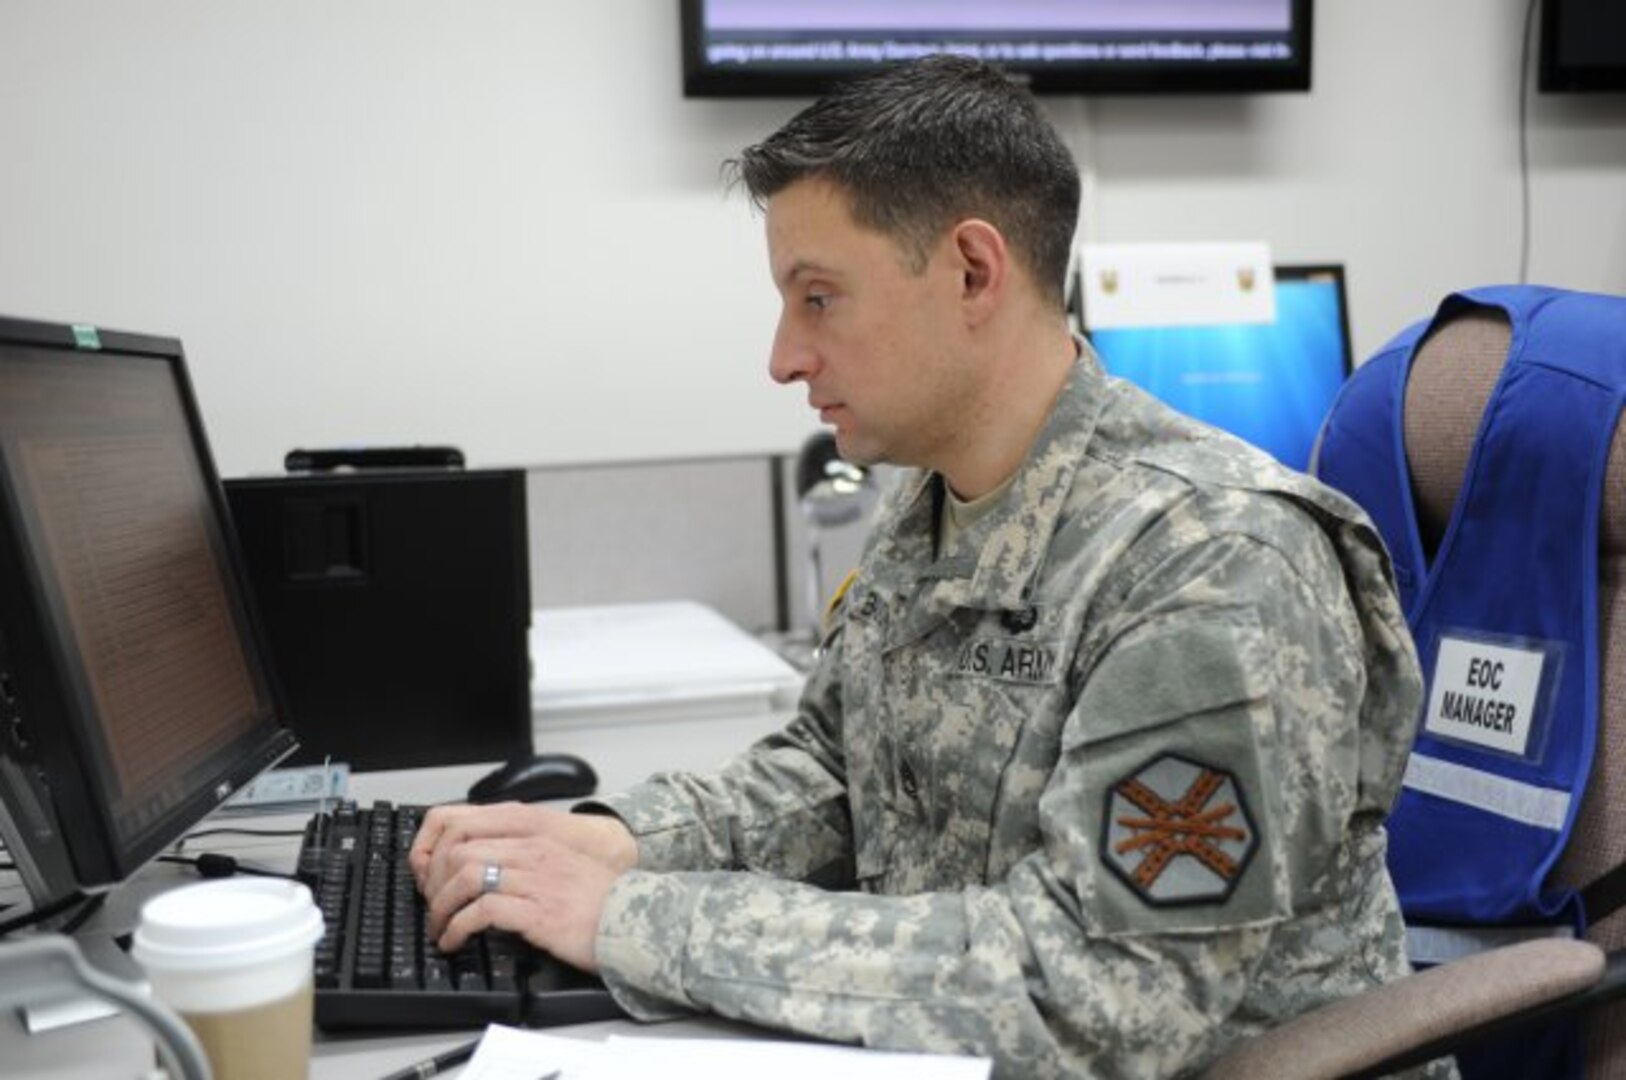 Sgt. 1st Class Daniel Boudreau, operation sergeant, assigned to U.S. Army Garrison Japan, updates information on his computer in the Emergency Operations Center during the 4th annual earthquake functional exercise conducted March 12 on the Camp Zama installation. (U.S. Army photos by Noriko Kudo)